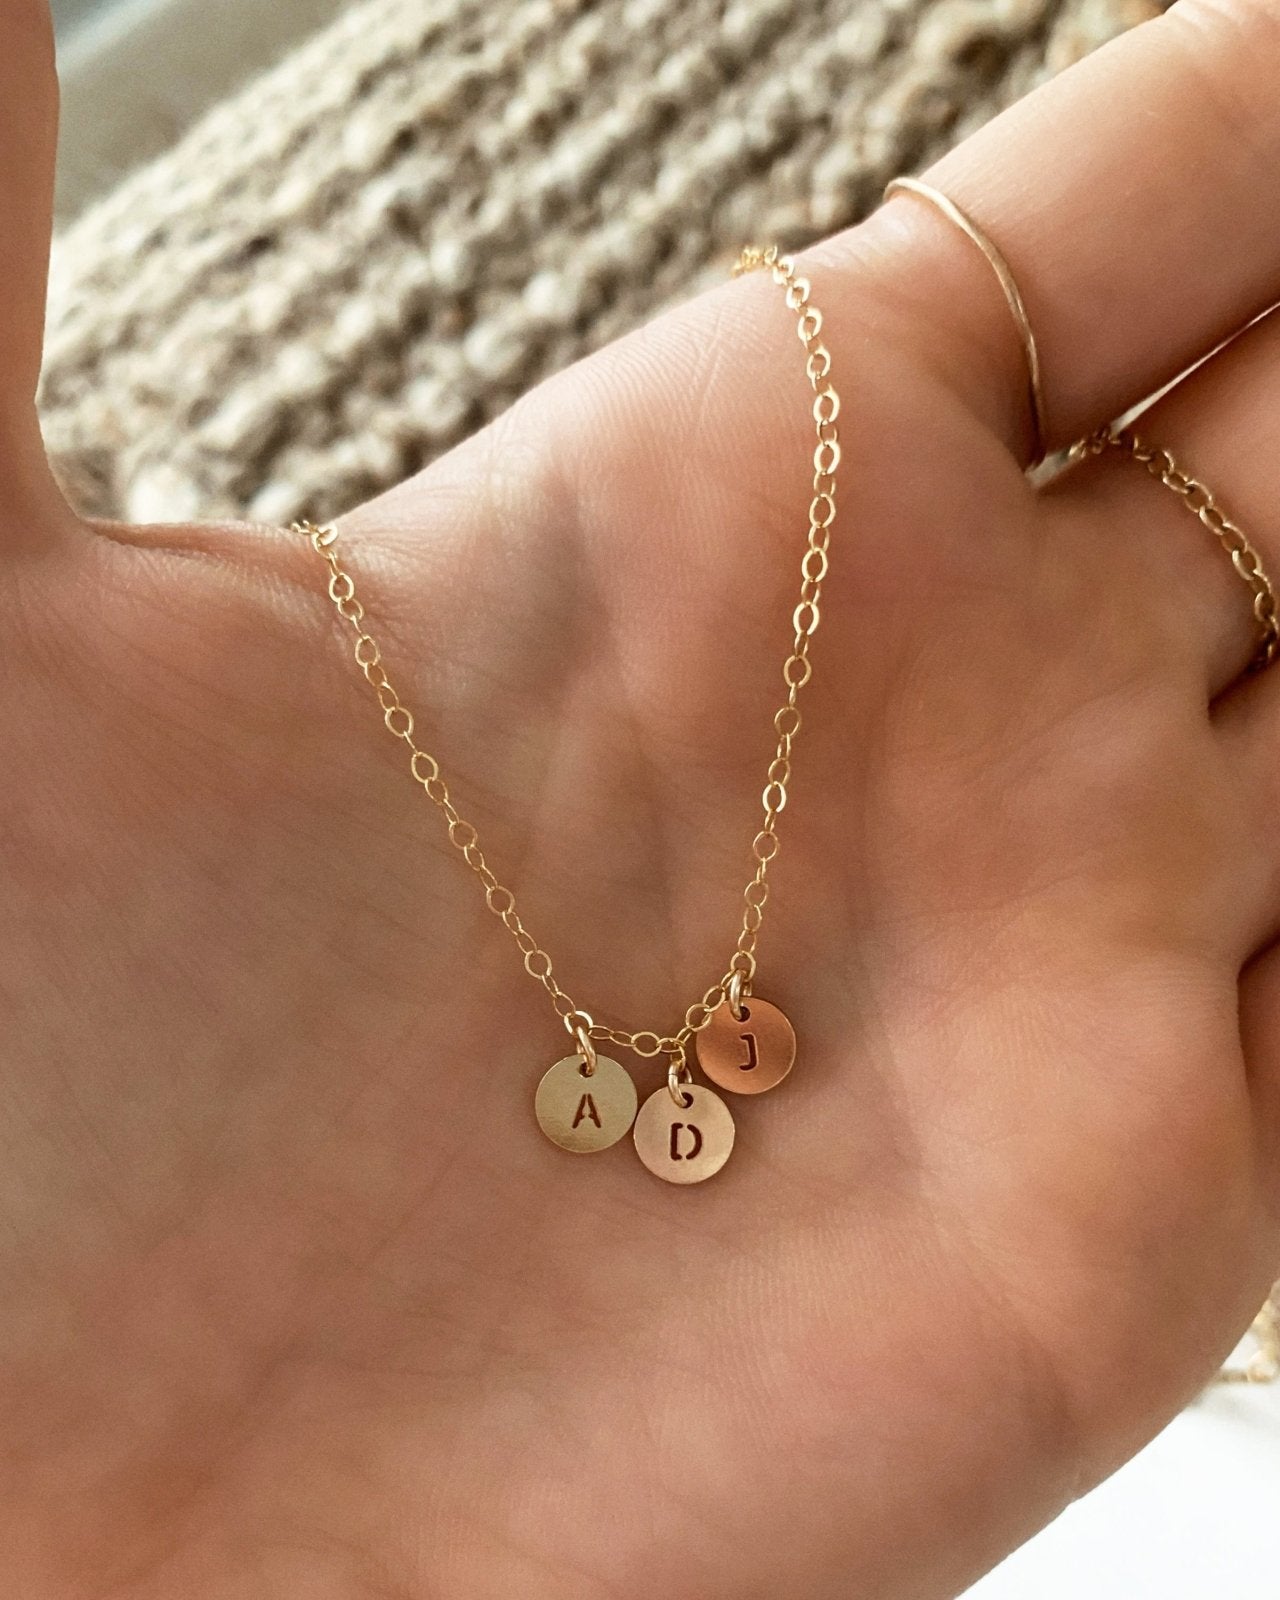 MULTI LETTER COIN NECKLACE- 14k Yellow Gold - The Littl - Deluxe Chain - 37cm (choker)